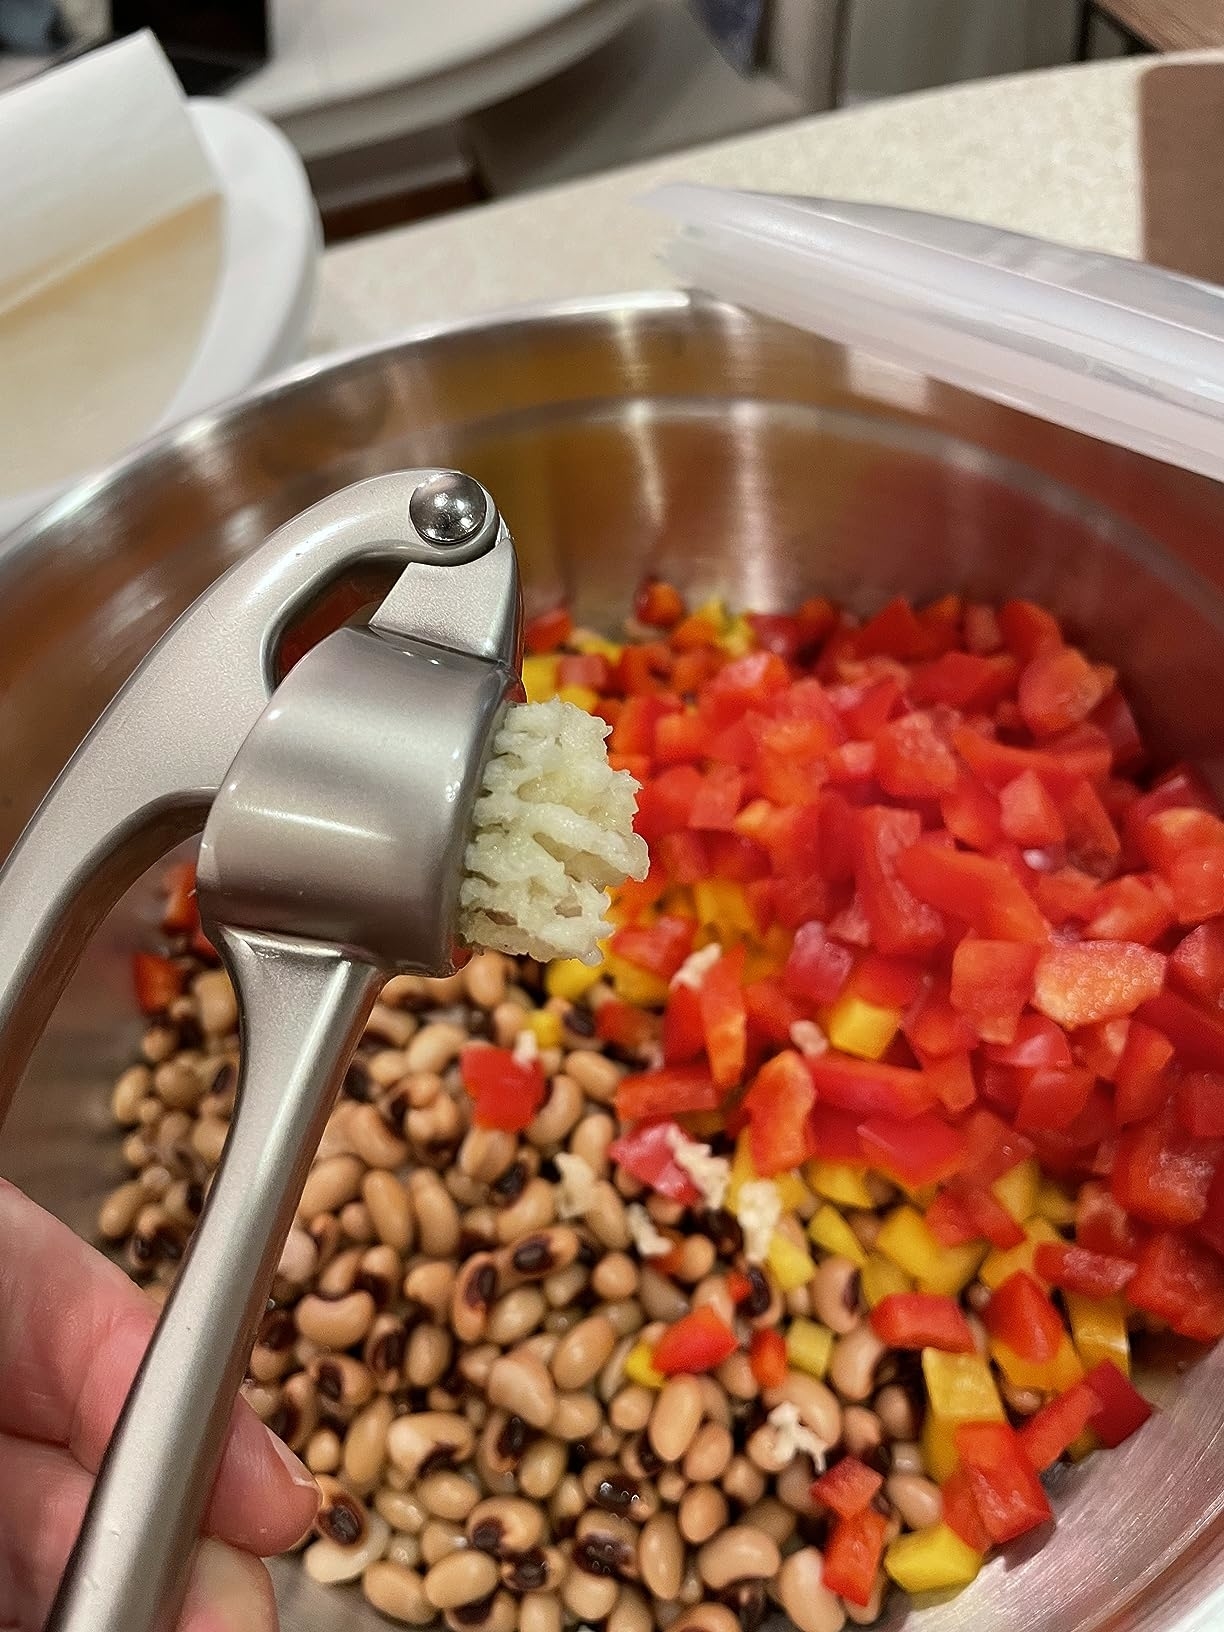 Pressed garlic over a bowl of black-eyed peas and diced bell peppers, likely for a recipe